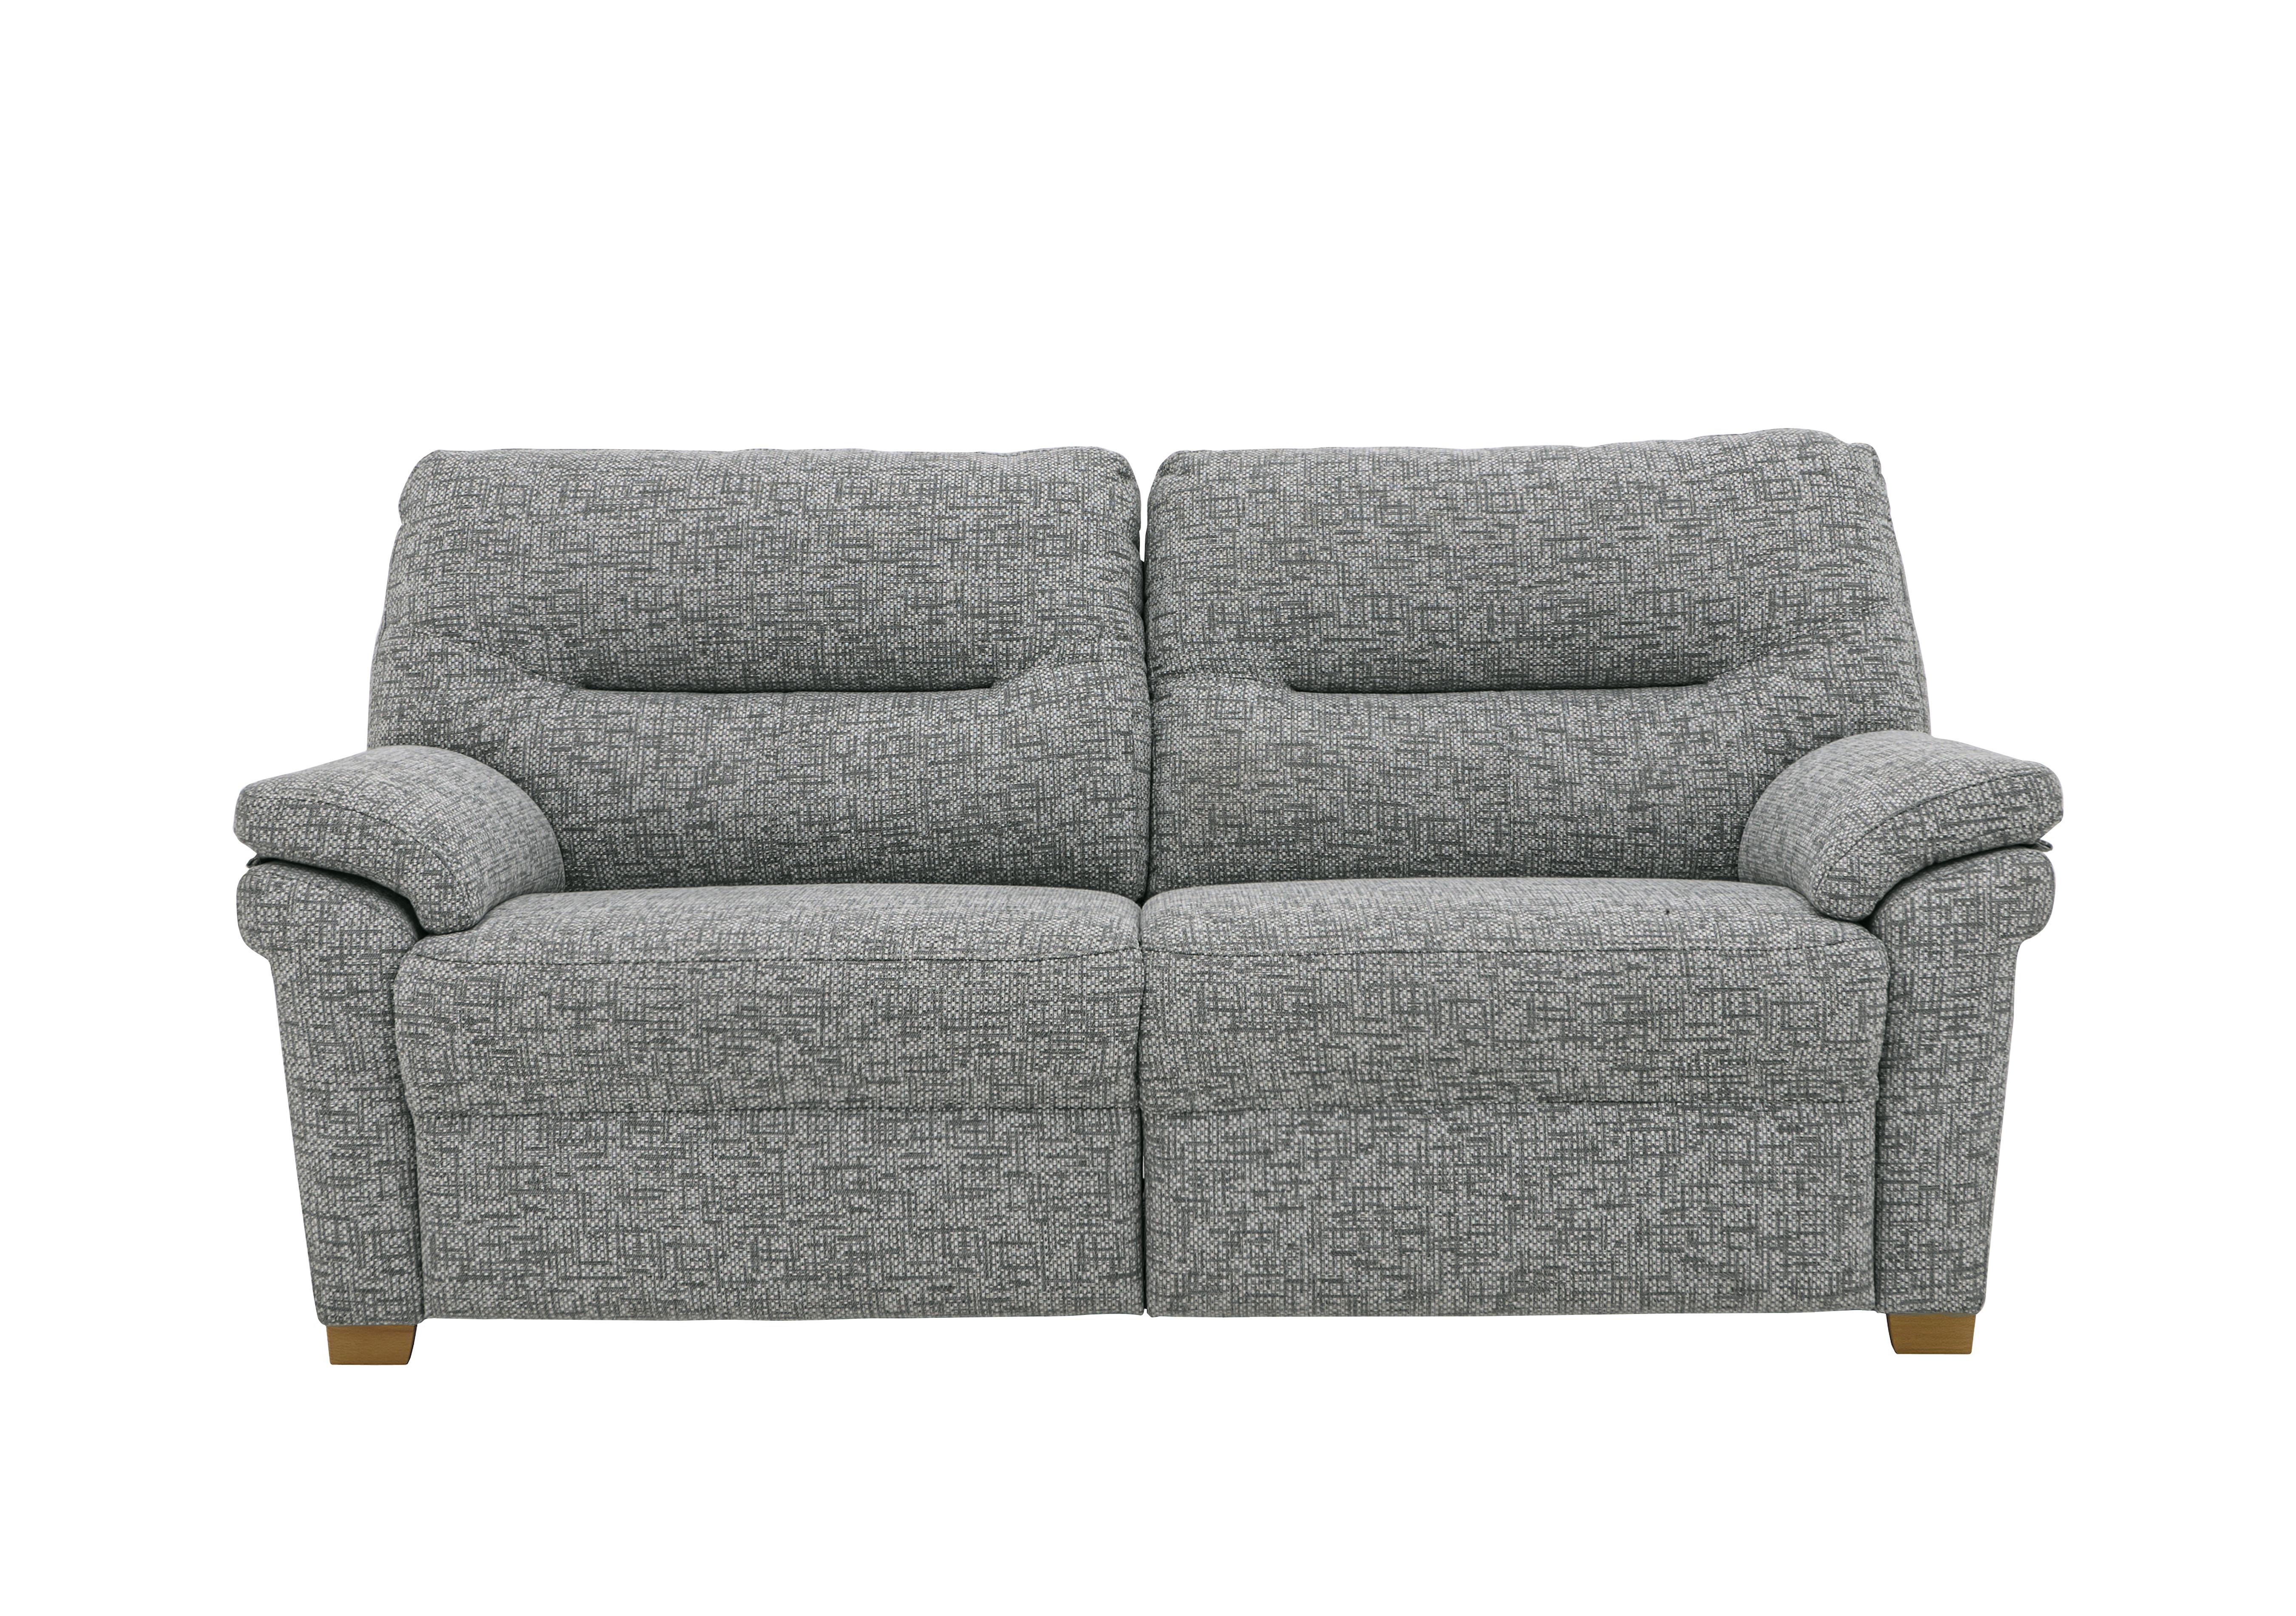 Seattle 3 Seater Fabric Sofa with Wooden Feet in B030 Remco Light Grey Ok on Furniture Village